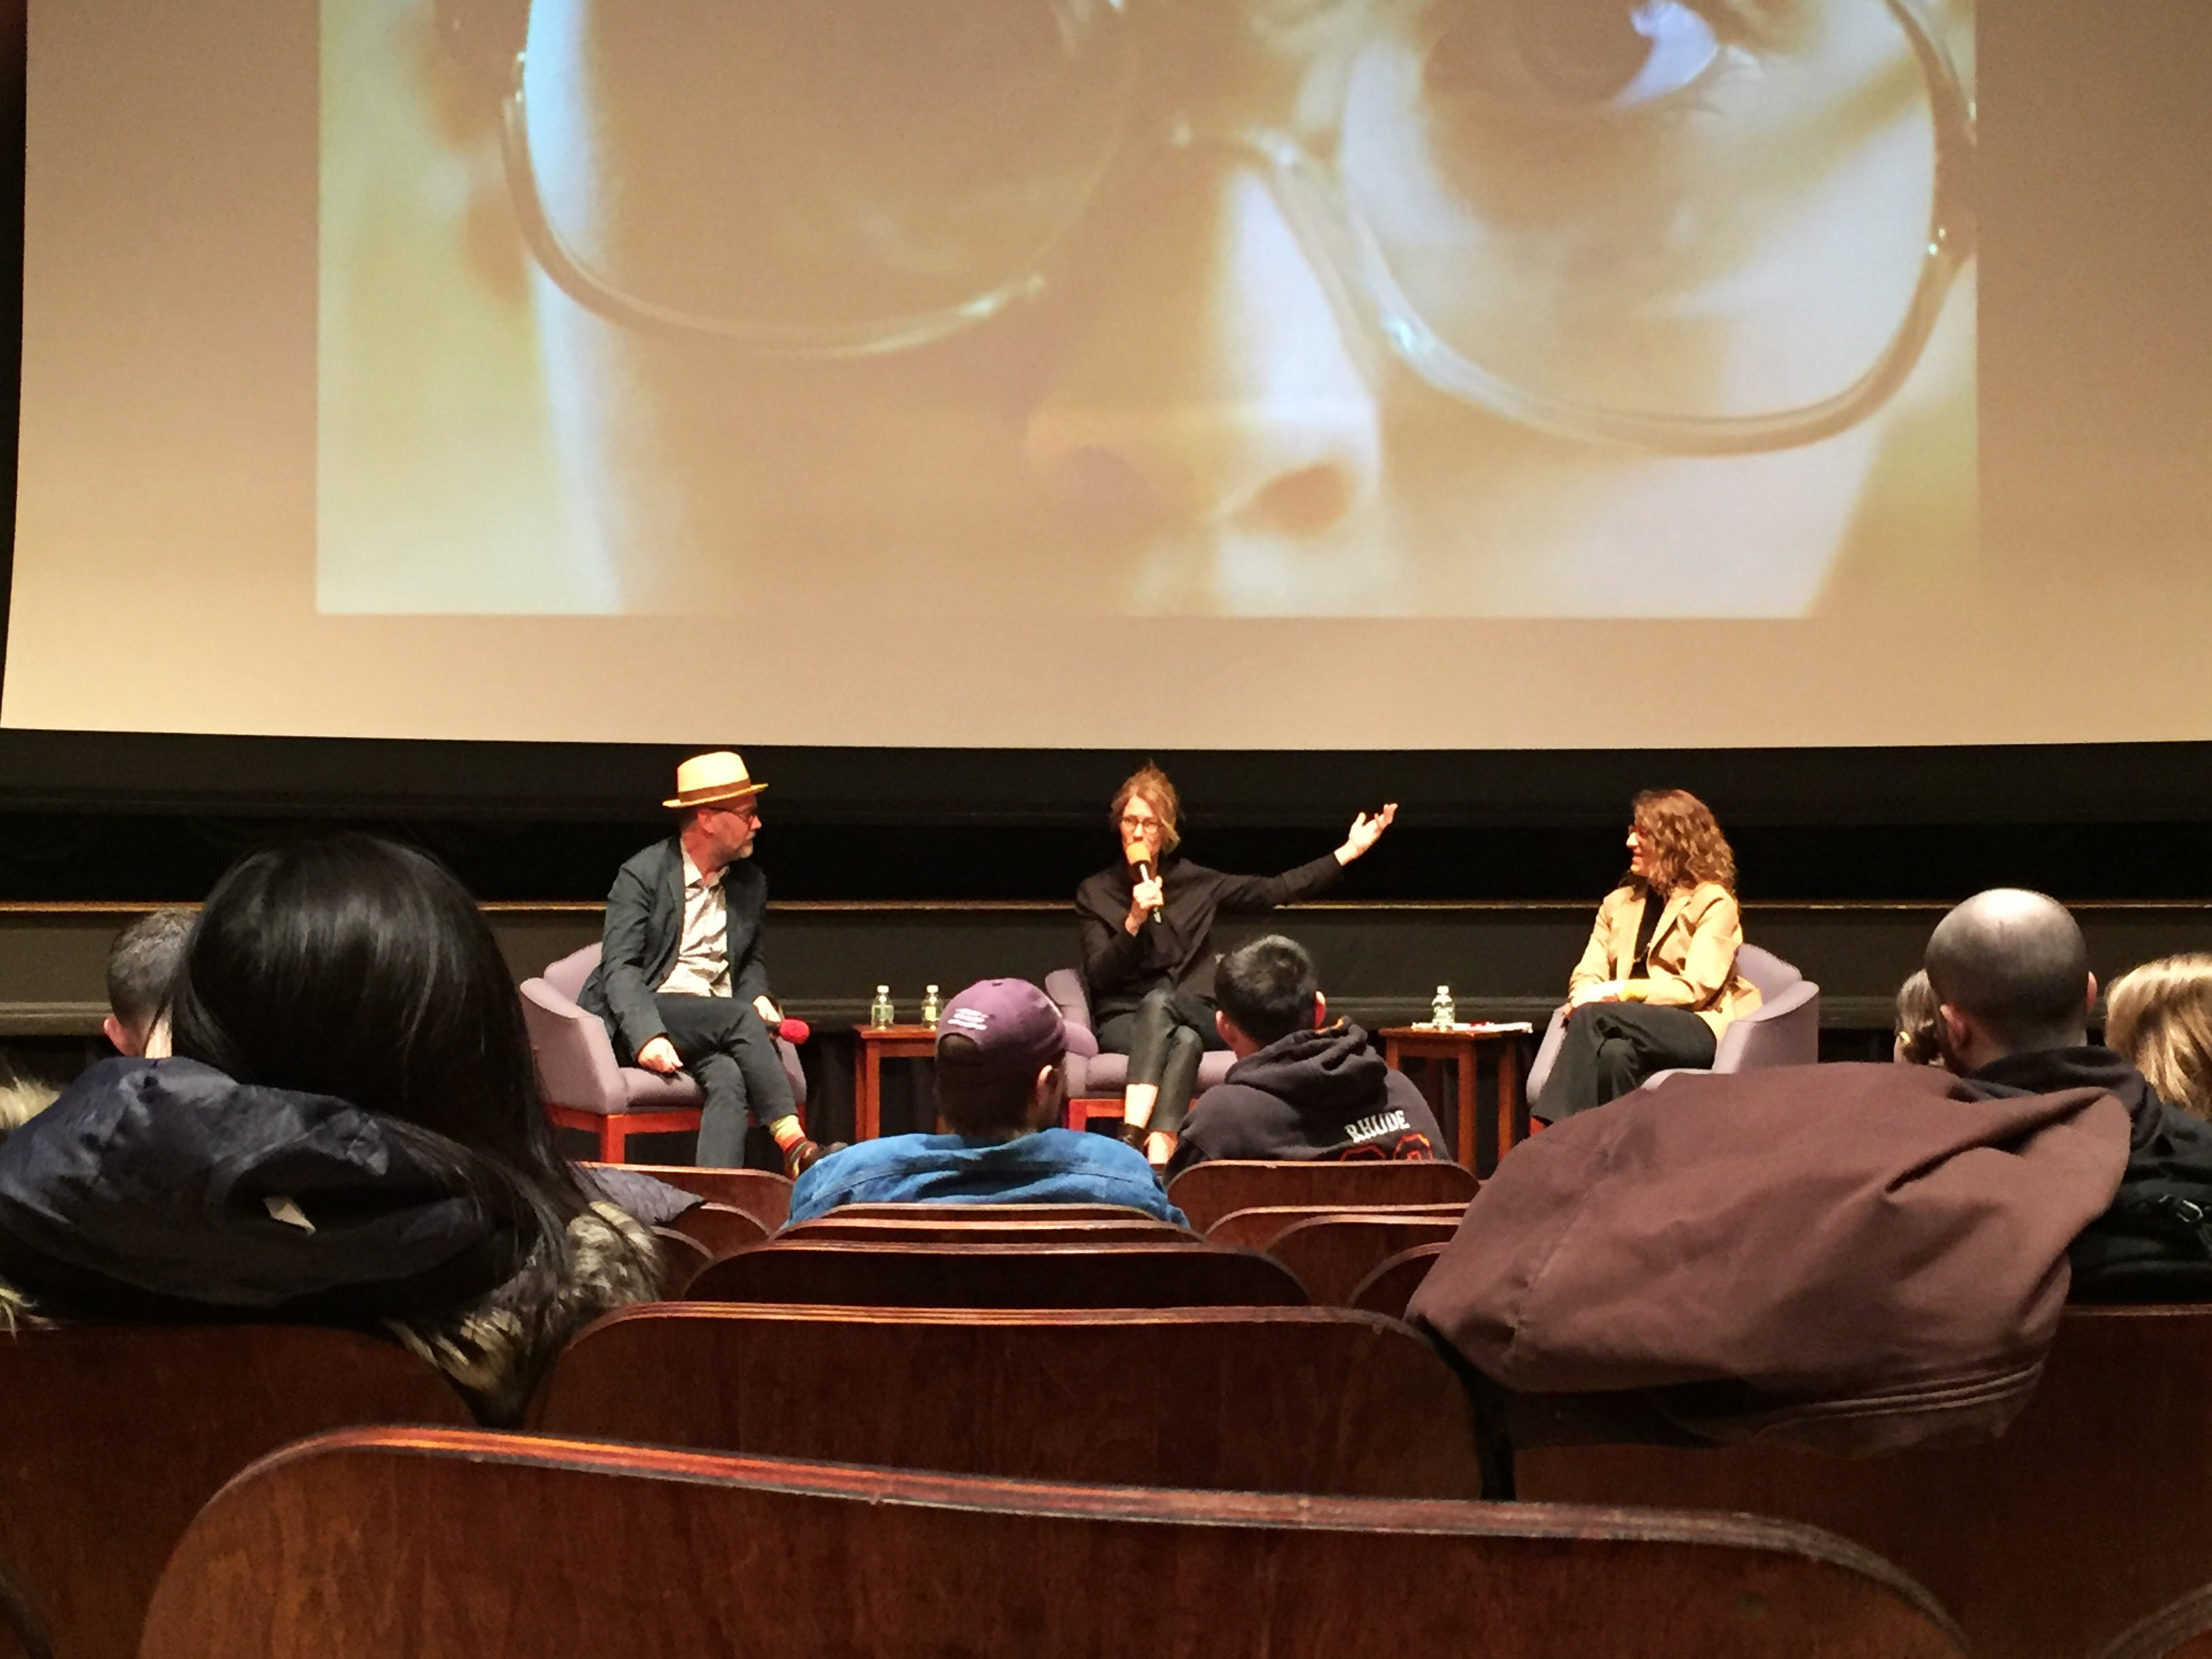 Battle of the Sexes” Screening and Discussion with Directors